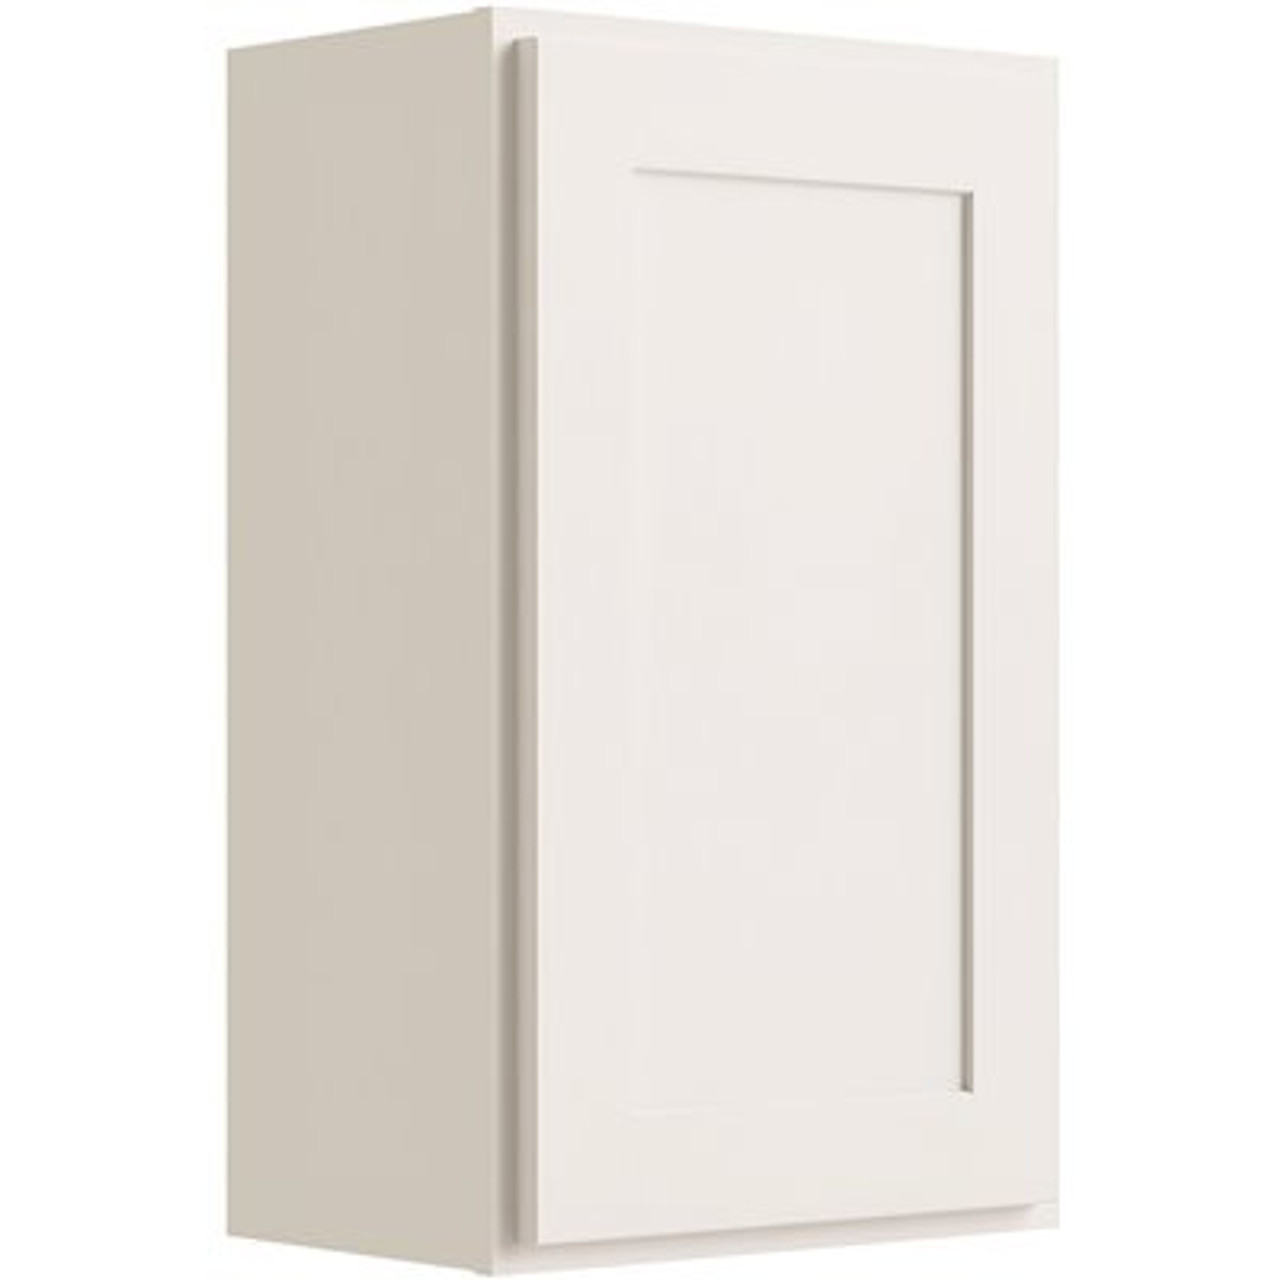 CNC Cabinetry 21" W X 30" H 1 Door Wall Cabinet, Luxor White